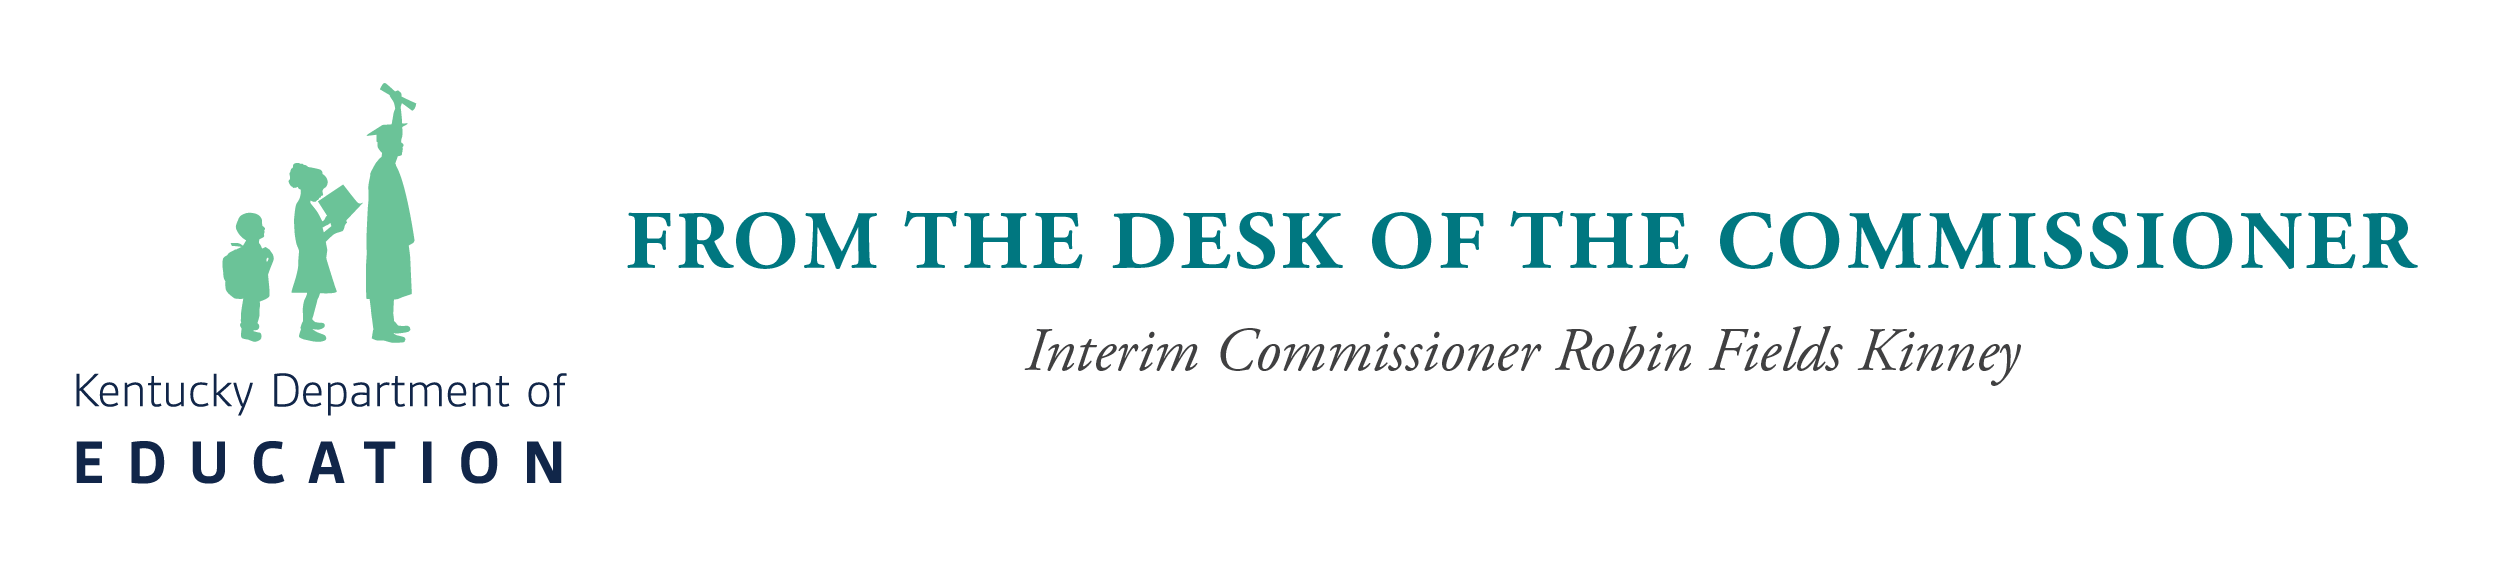 From the desk of the Commissioner: Interim Commissioner Robin Fields Kinney